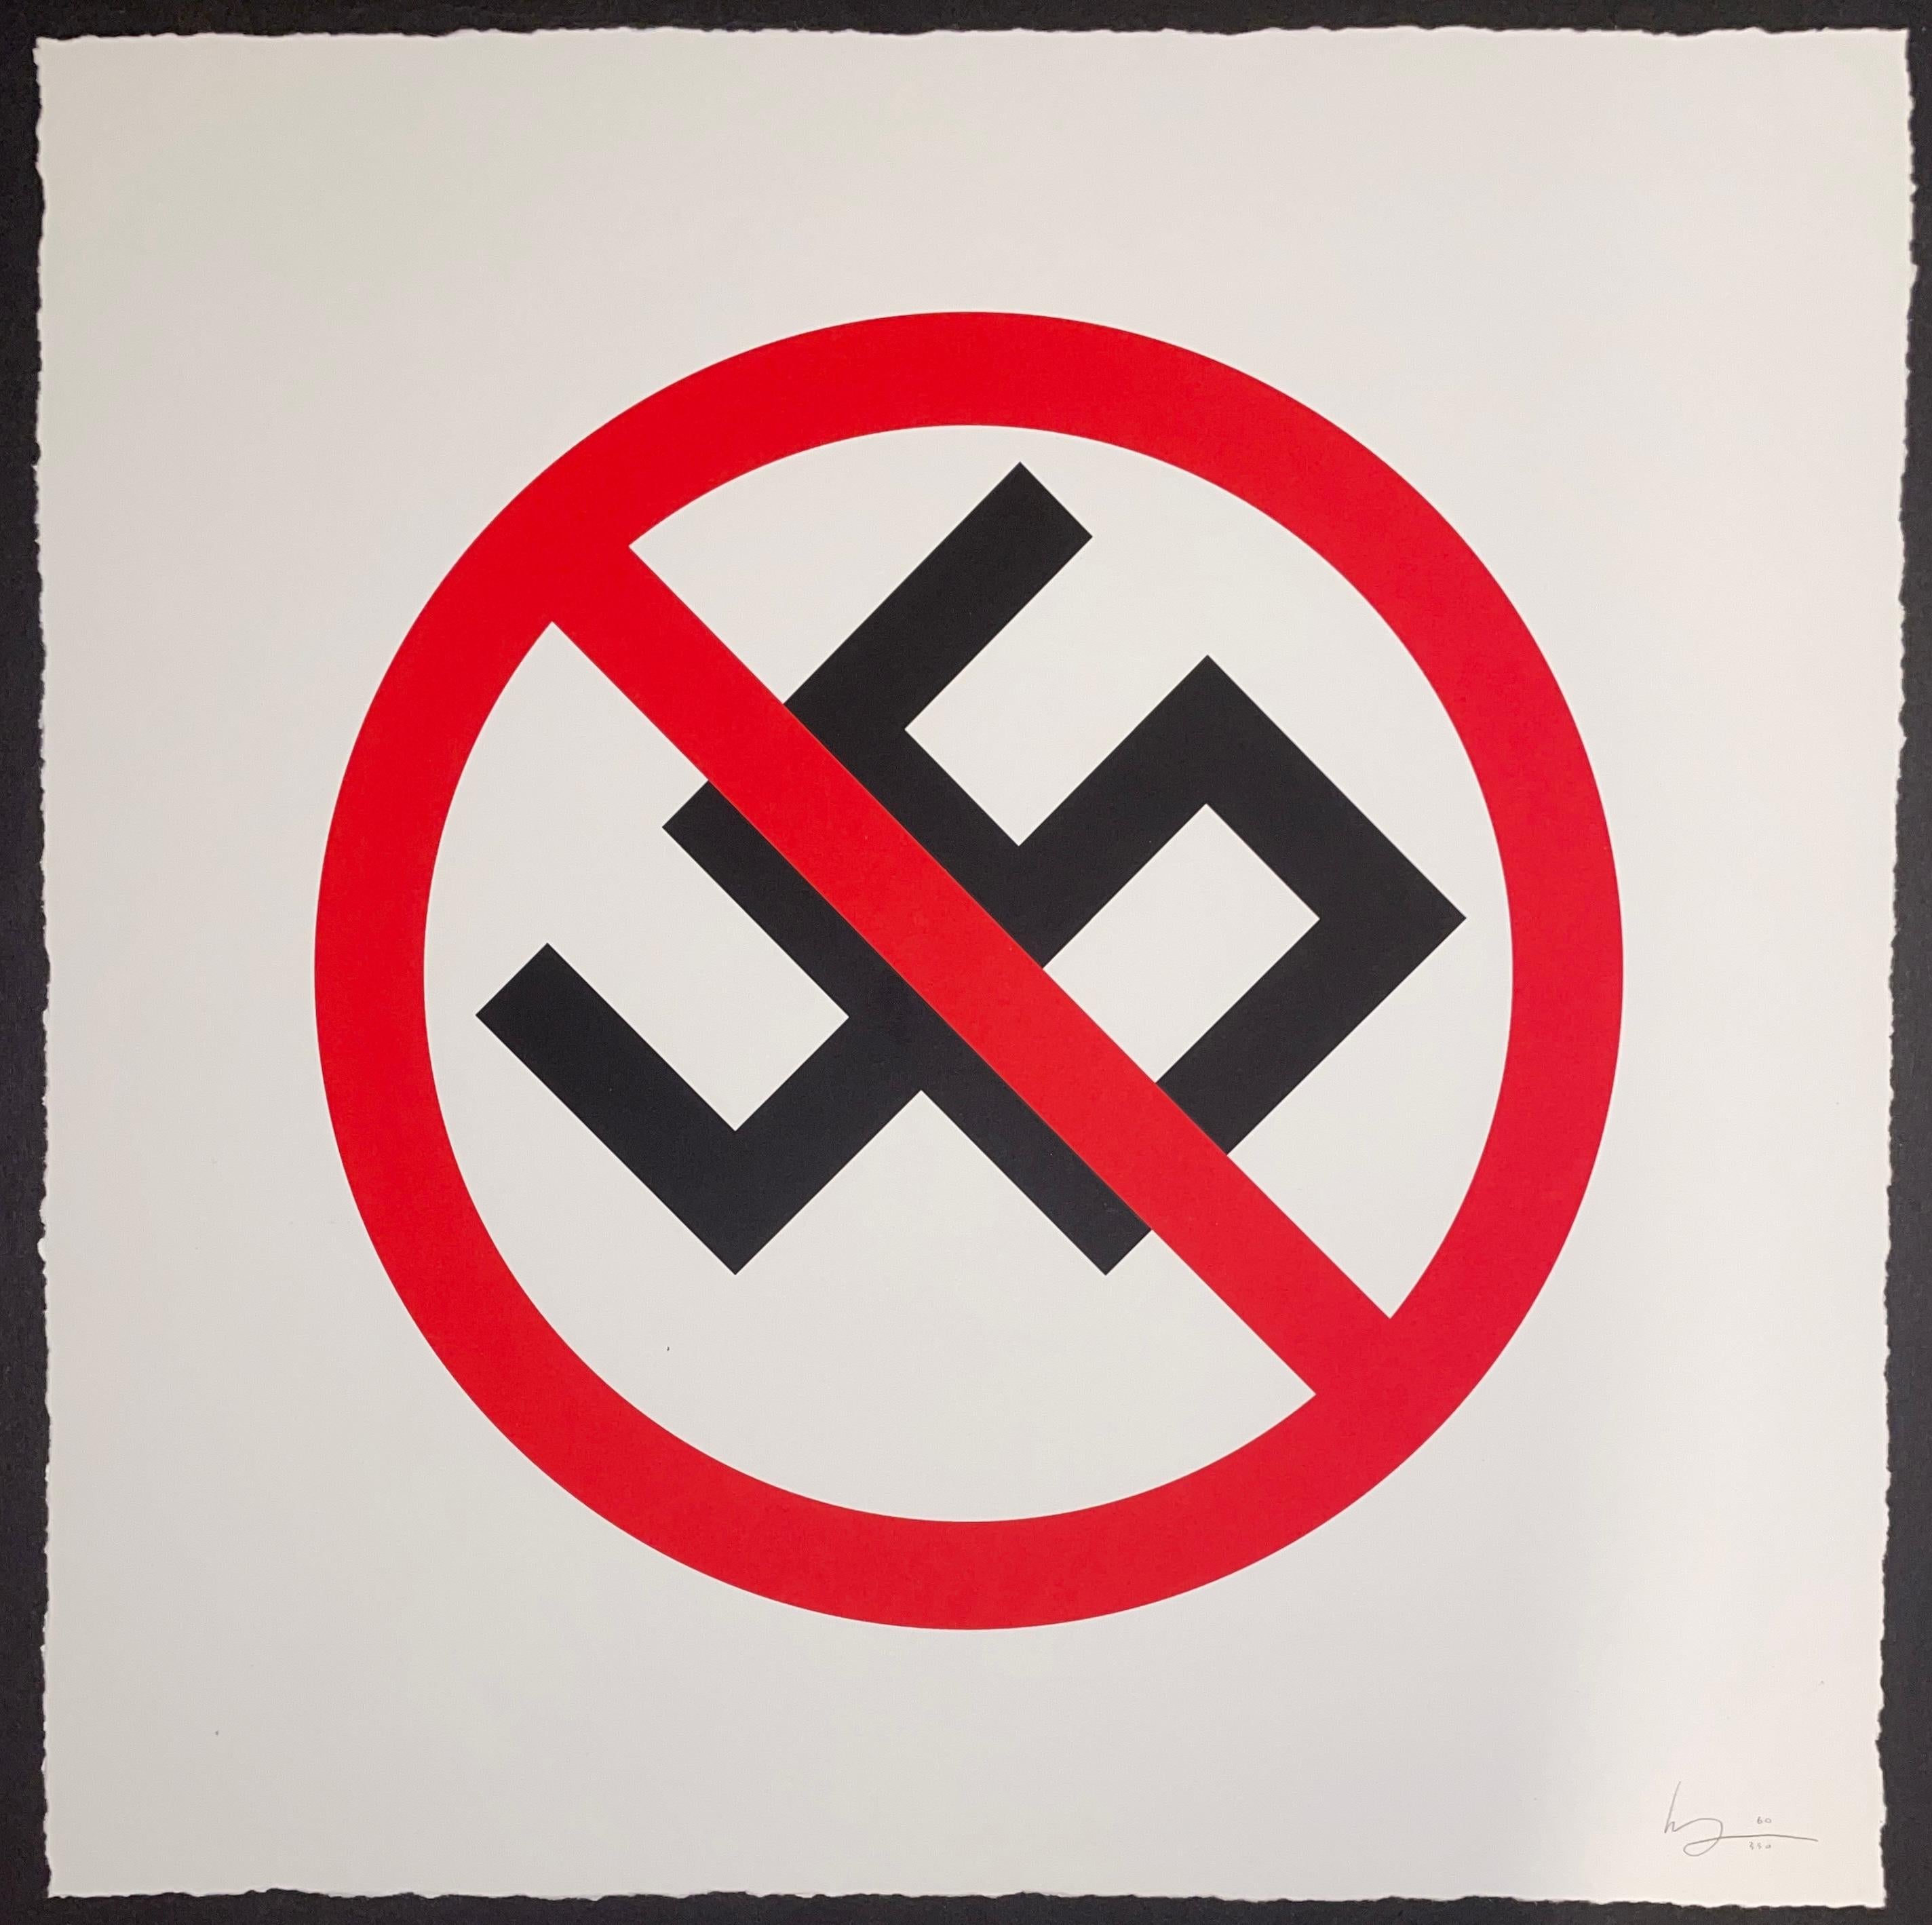 Mike Mitchell 45 Anti Donald Trump Screenprint Signed & Numbered End Racism Art 